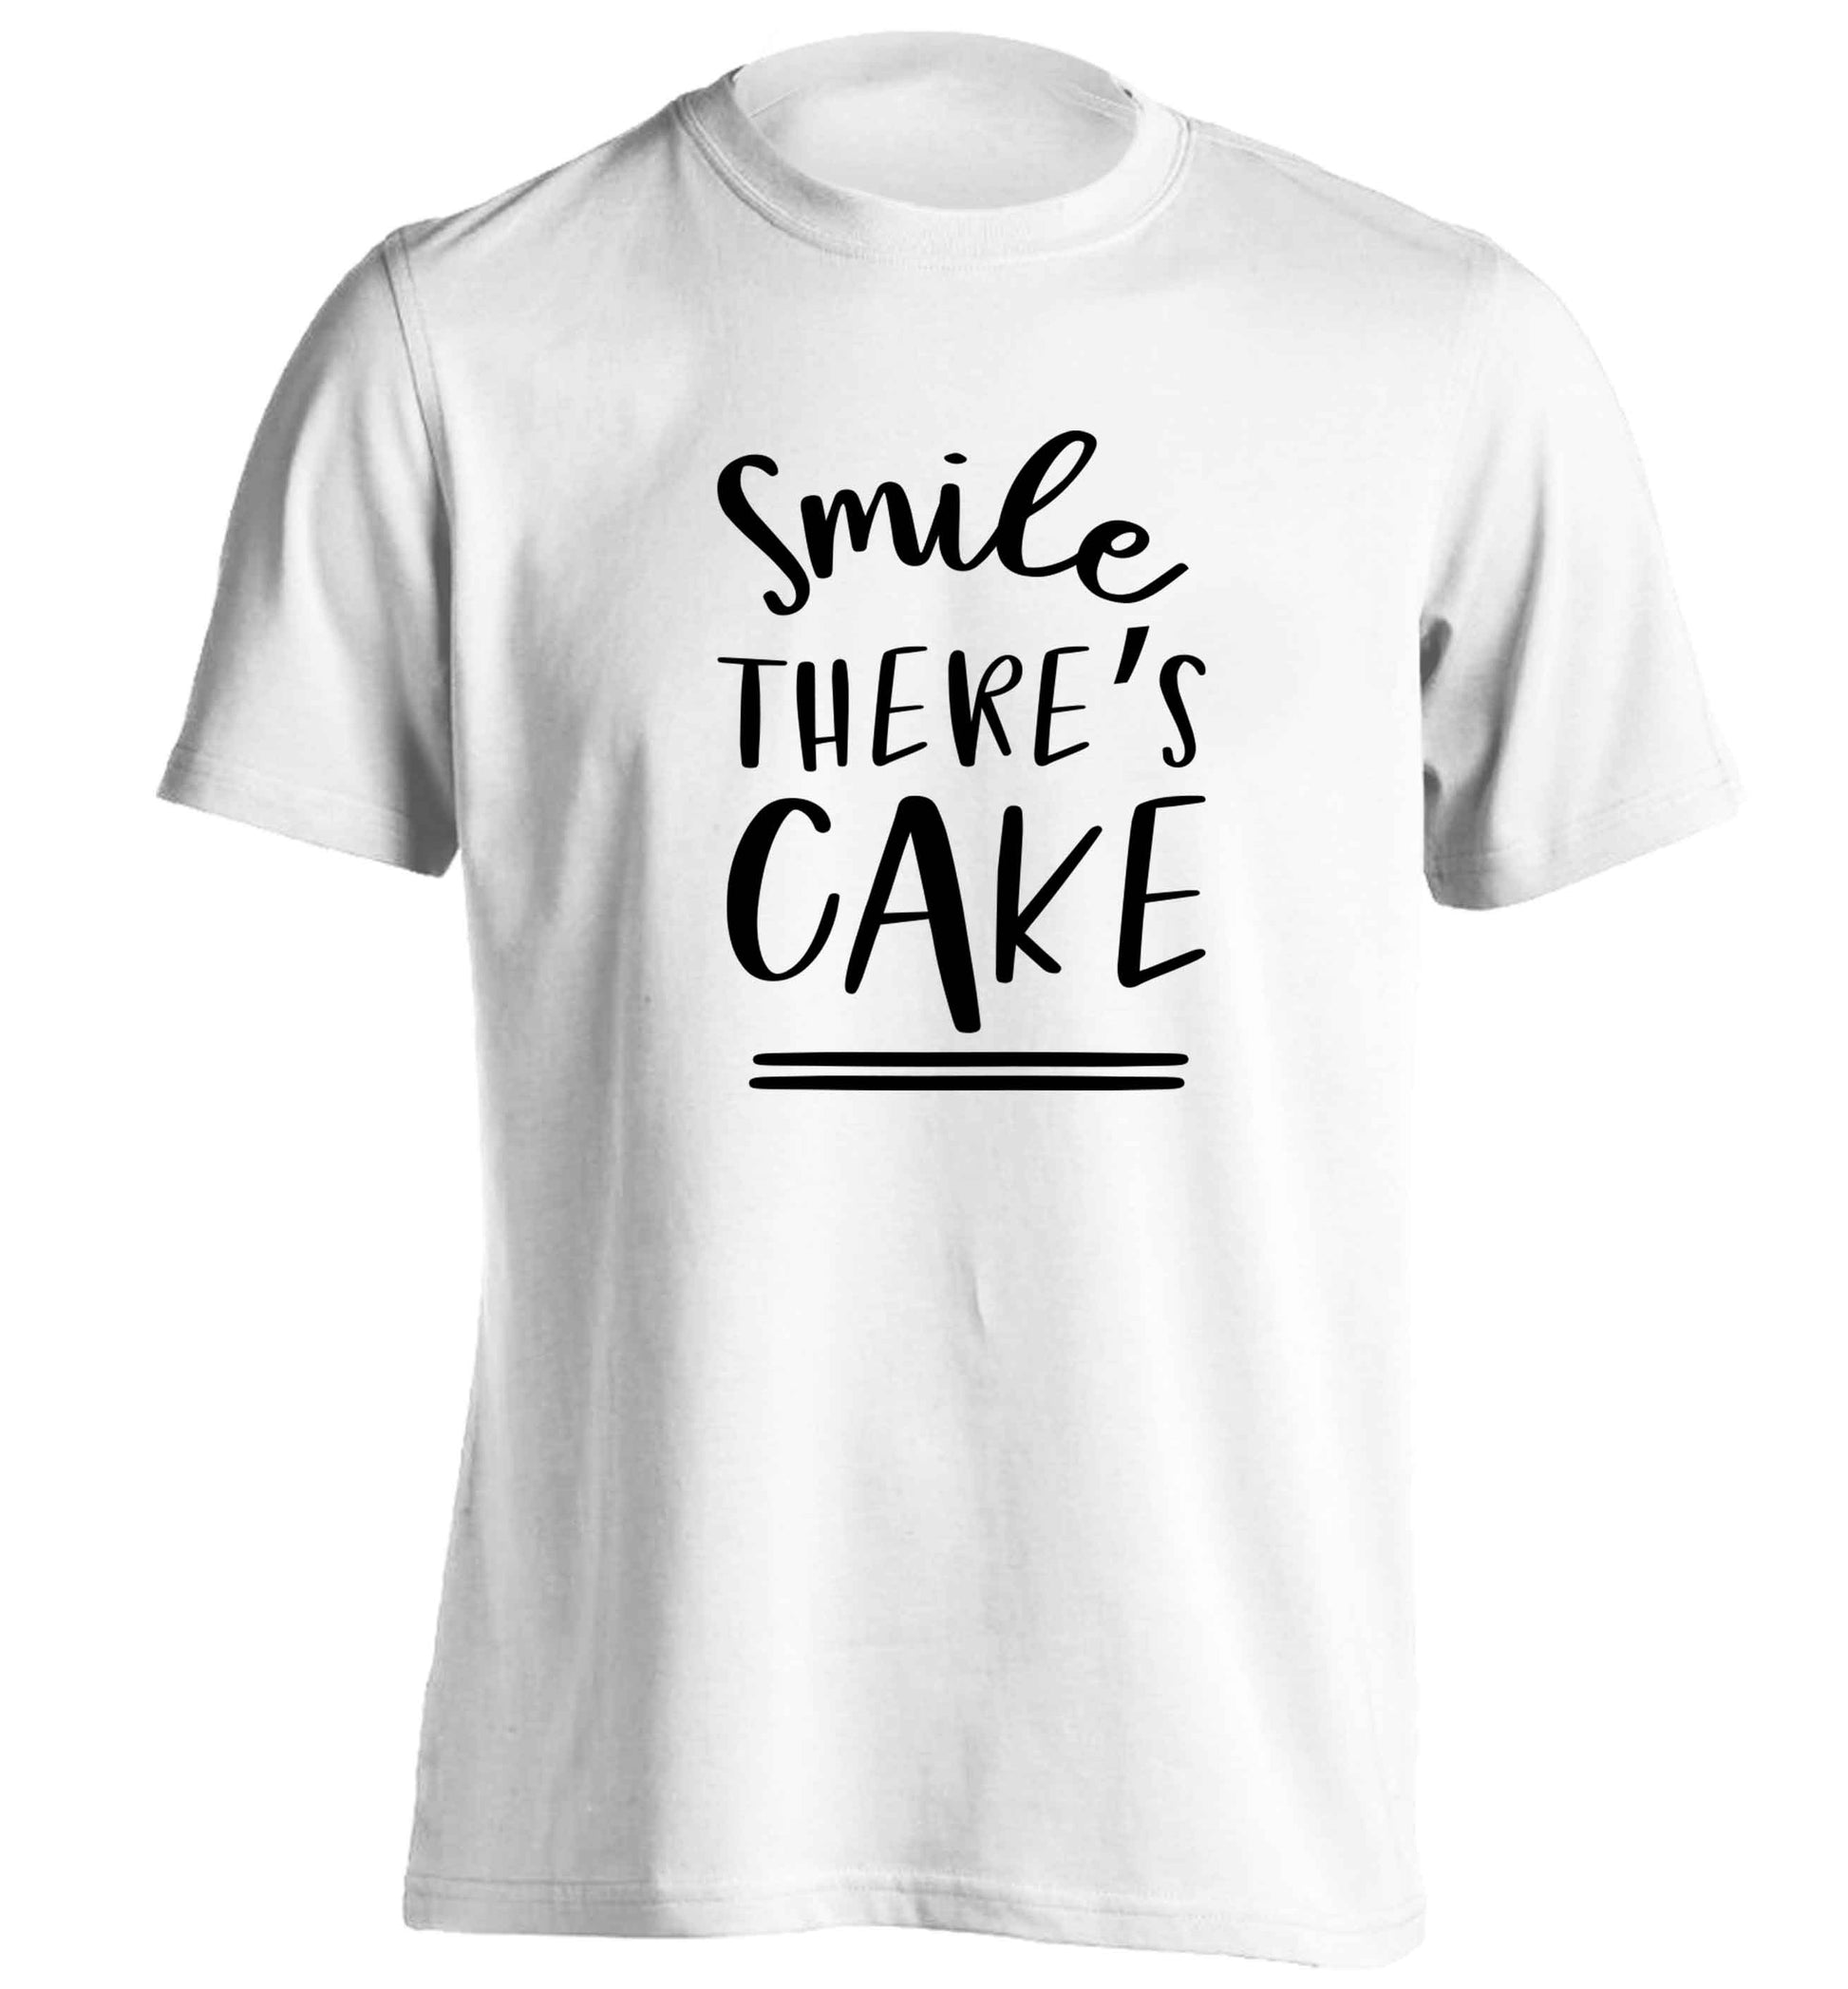 Smile there's cake adults unisex white Tshirt 2XL